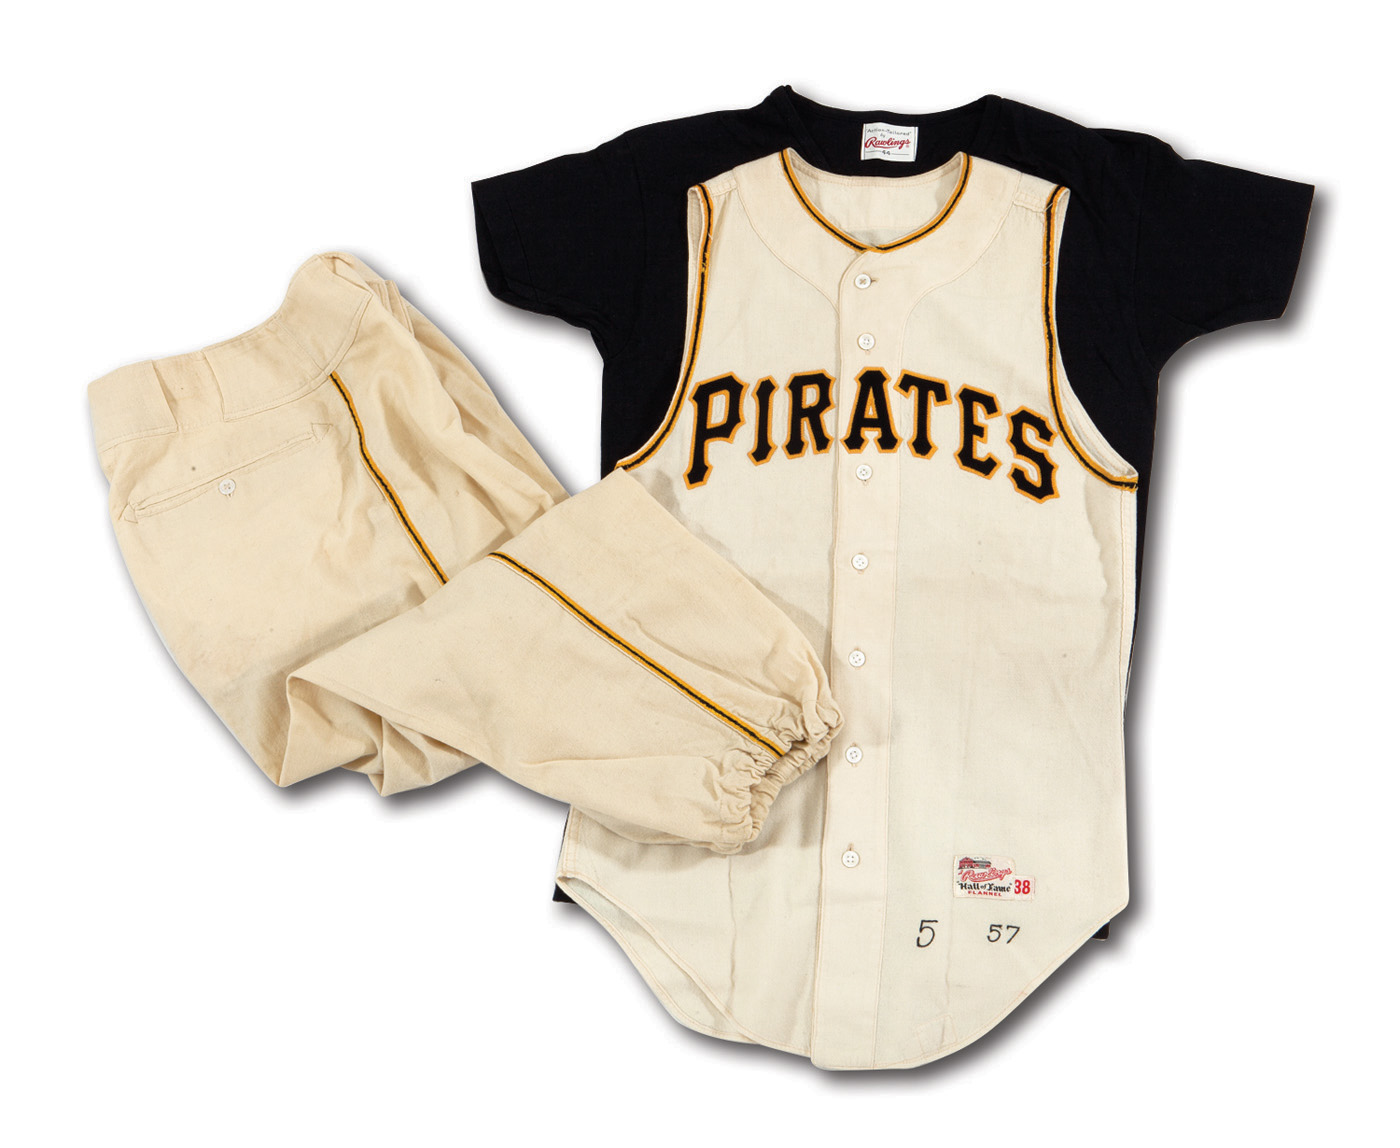 Pittsburgh Pirates Game Used MLB Jerseys for sale